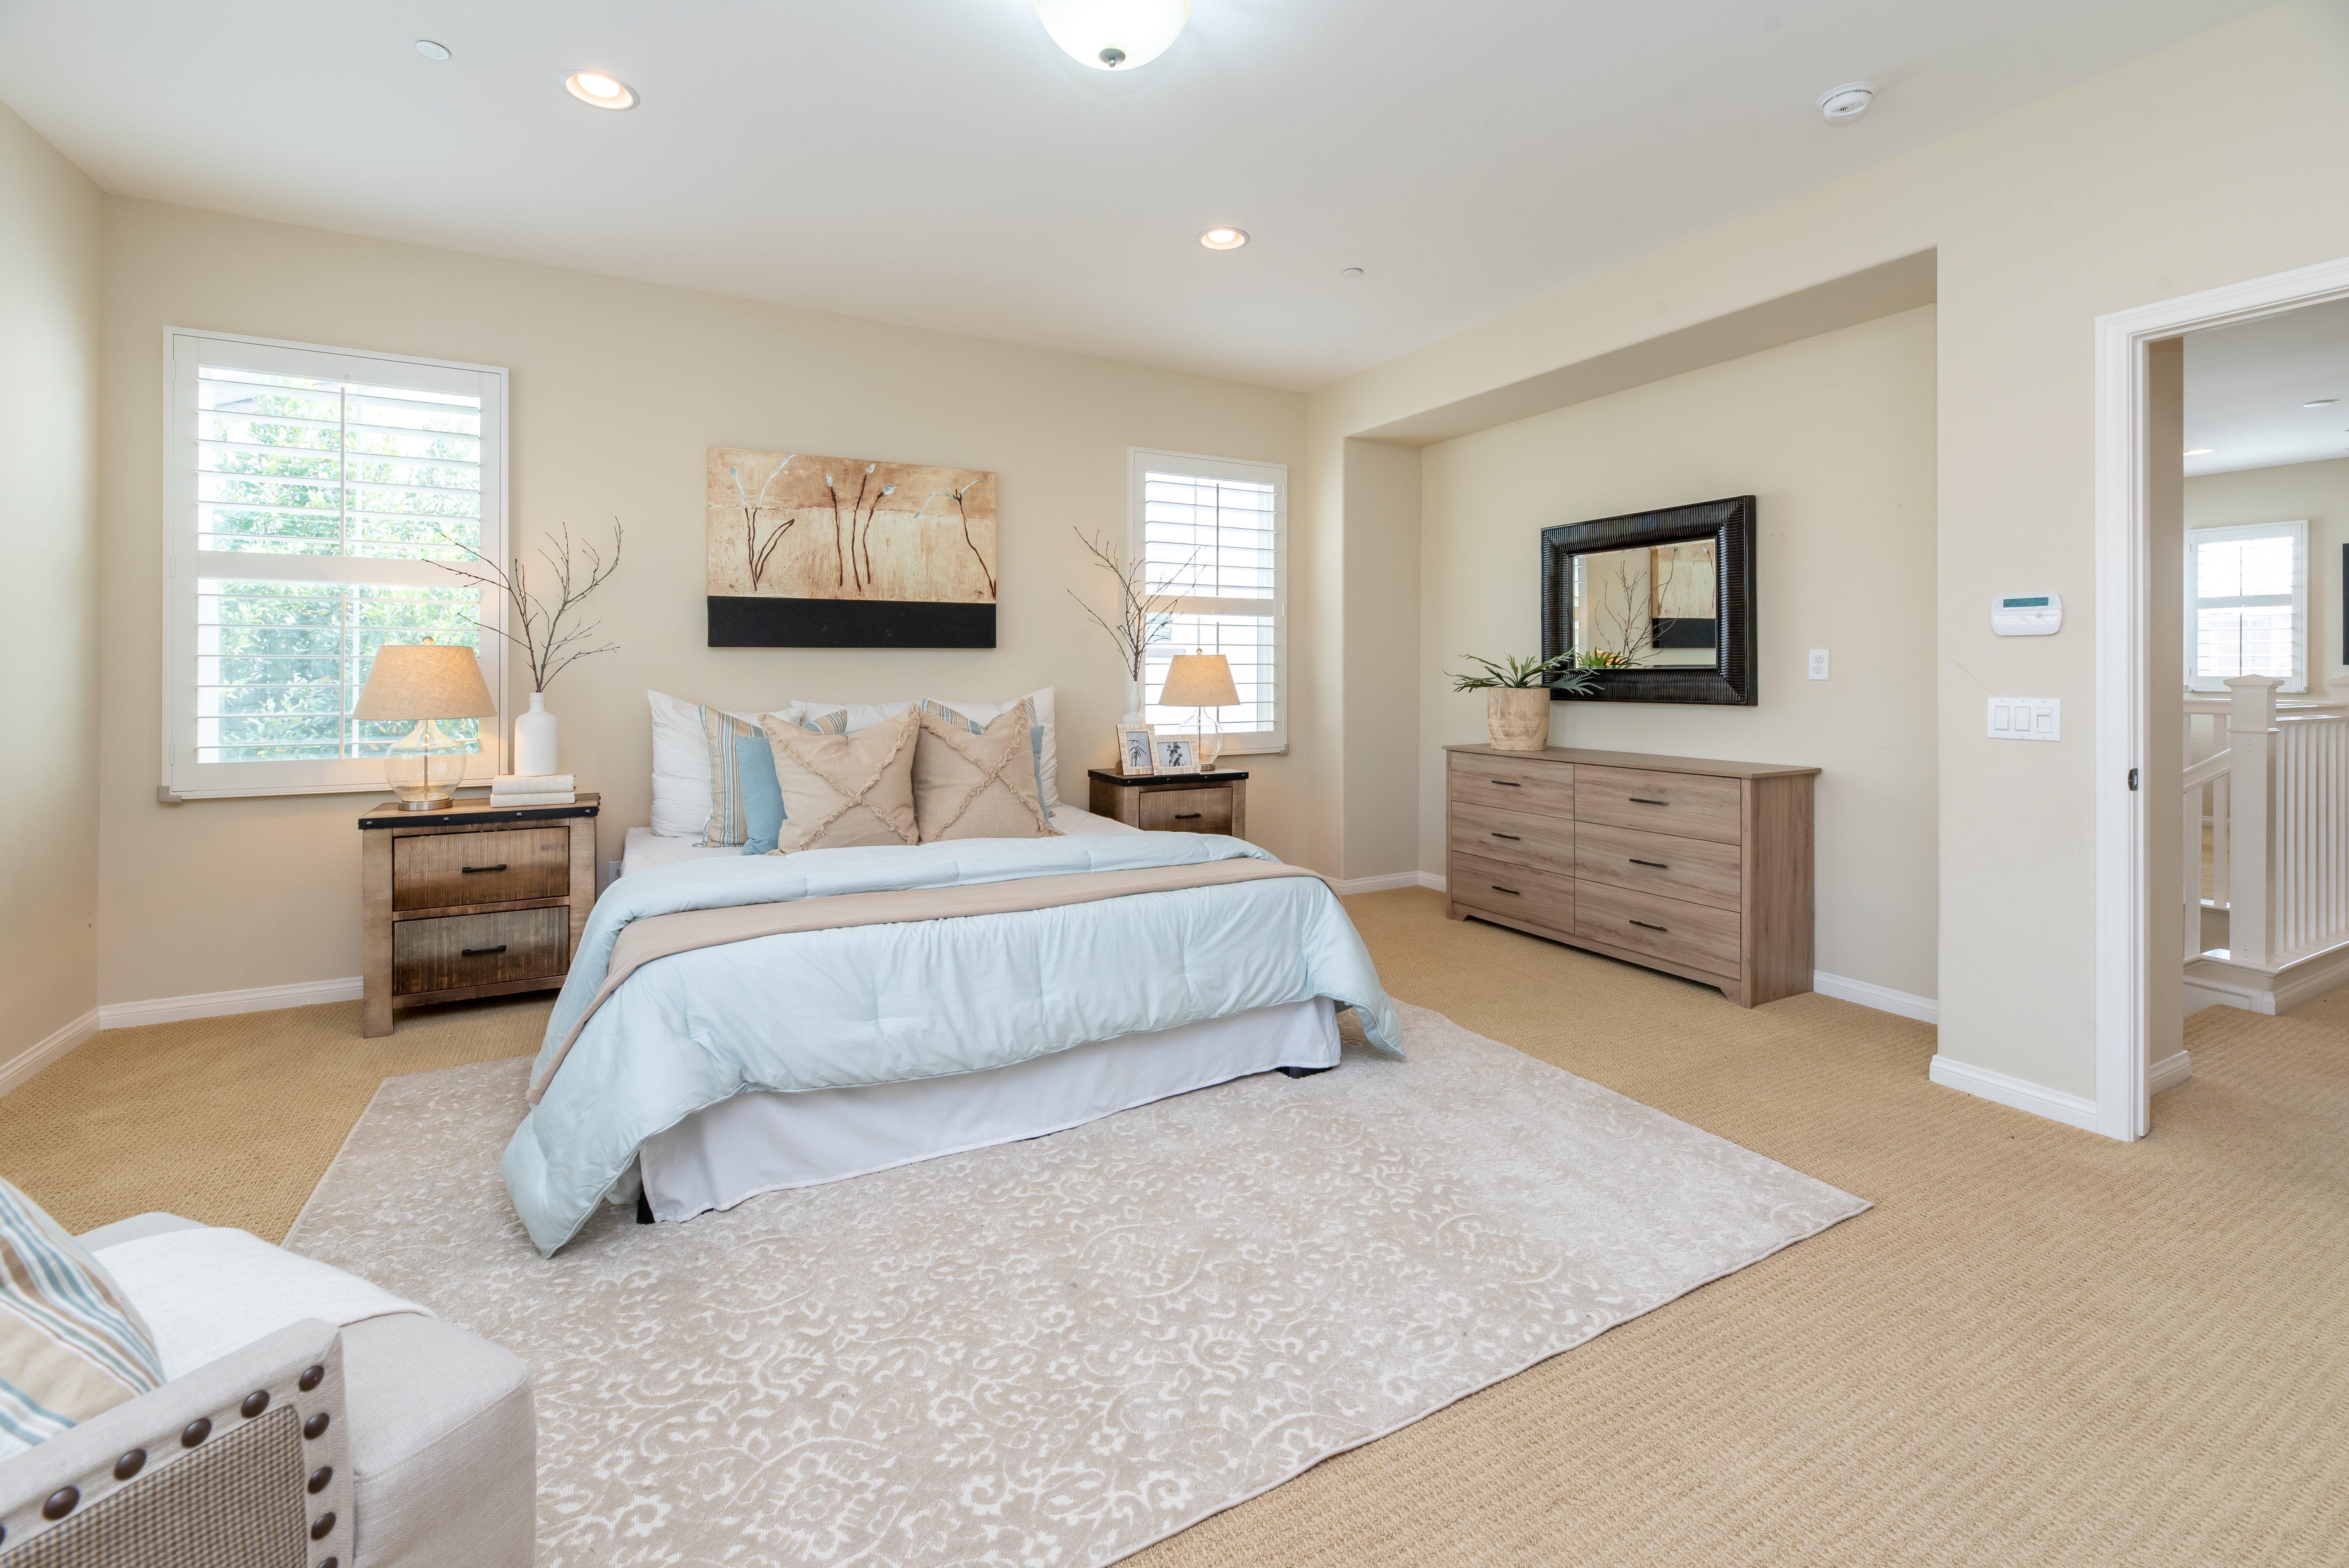 You are currently viewing Top 4 Finishing Touches for Your Master Bedroom